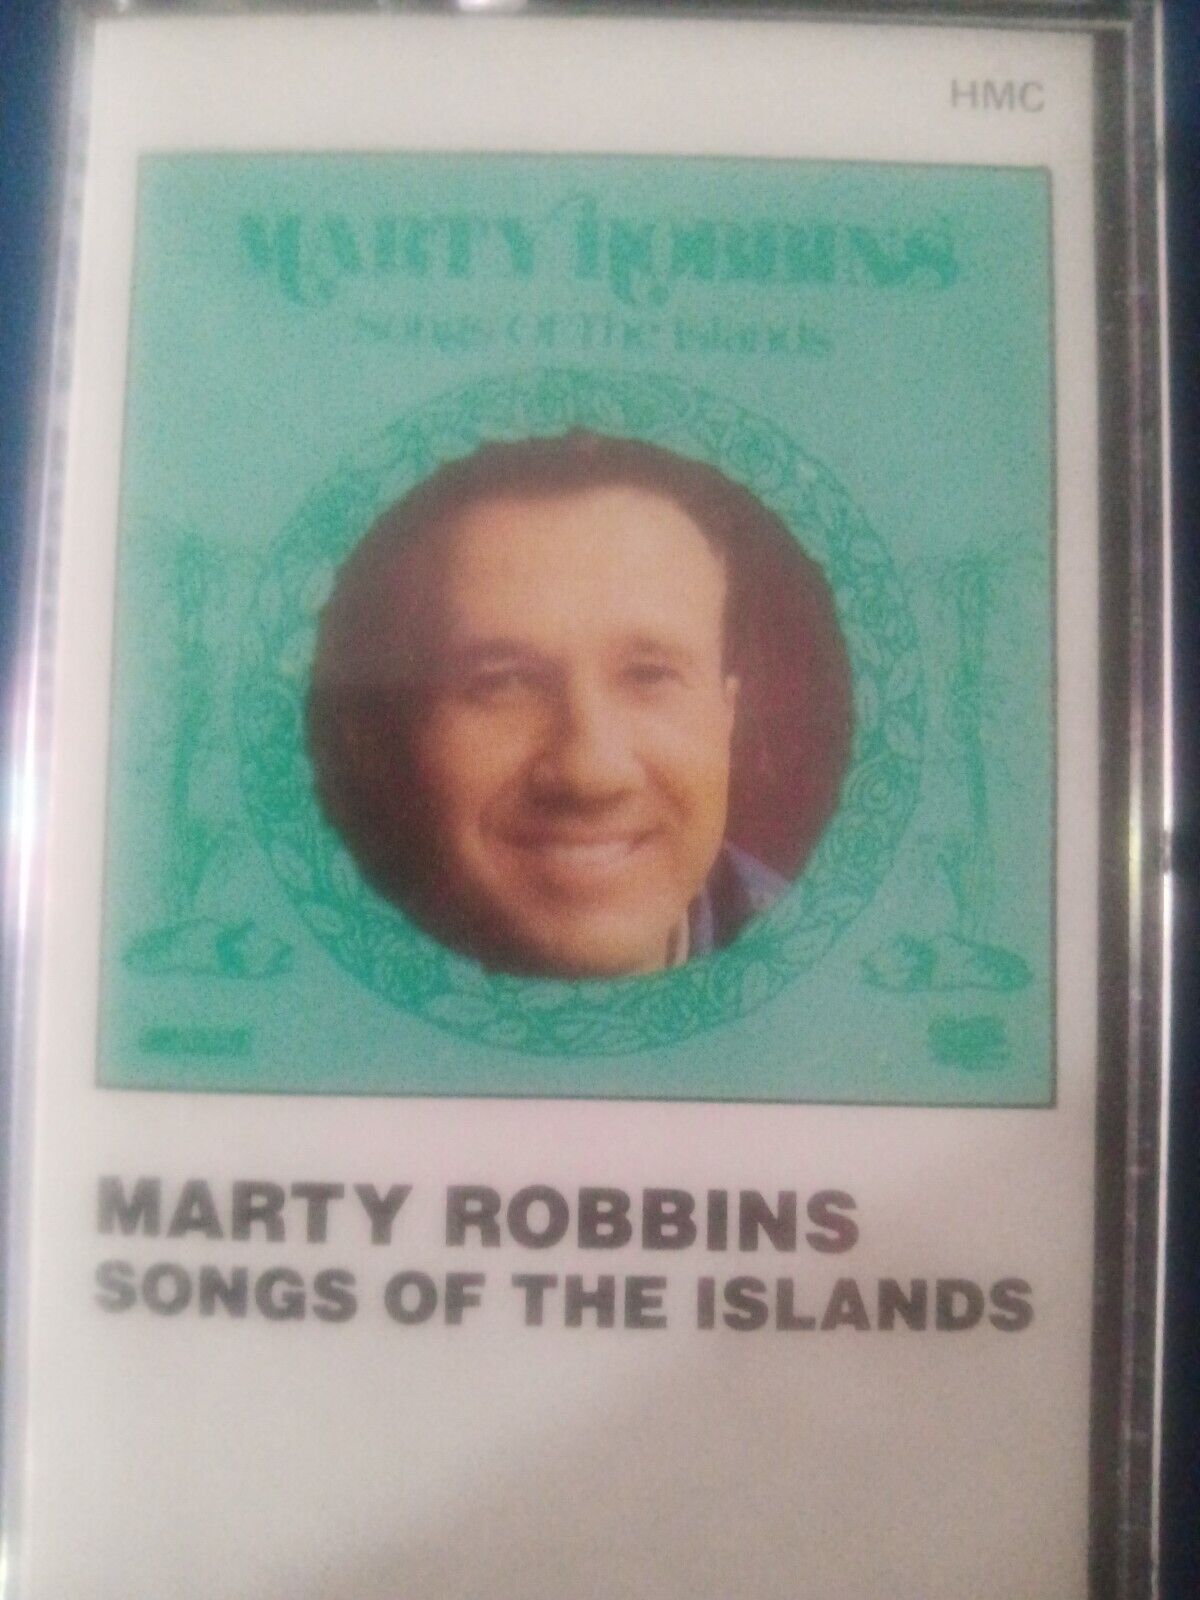 Marty Robbins Songs of the Islands